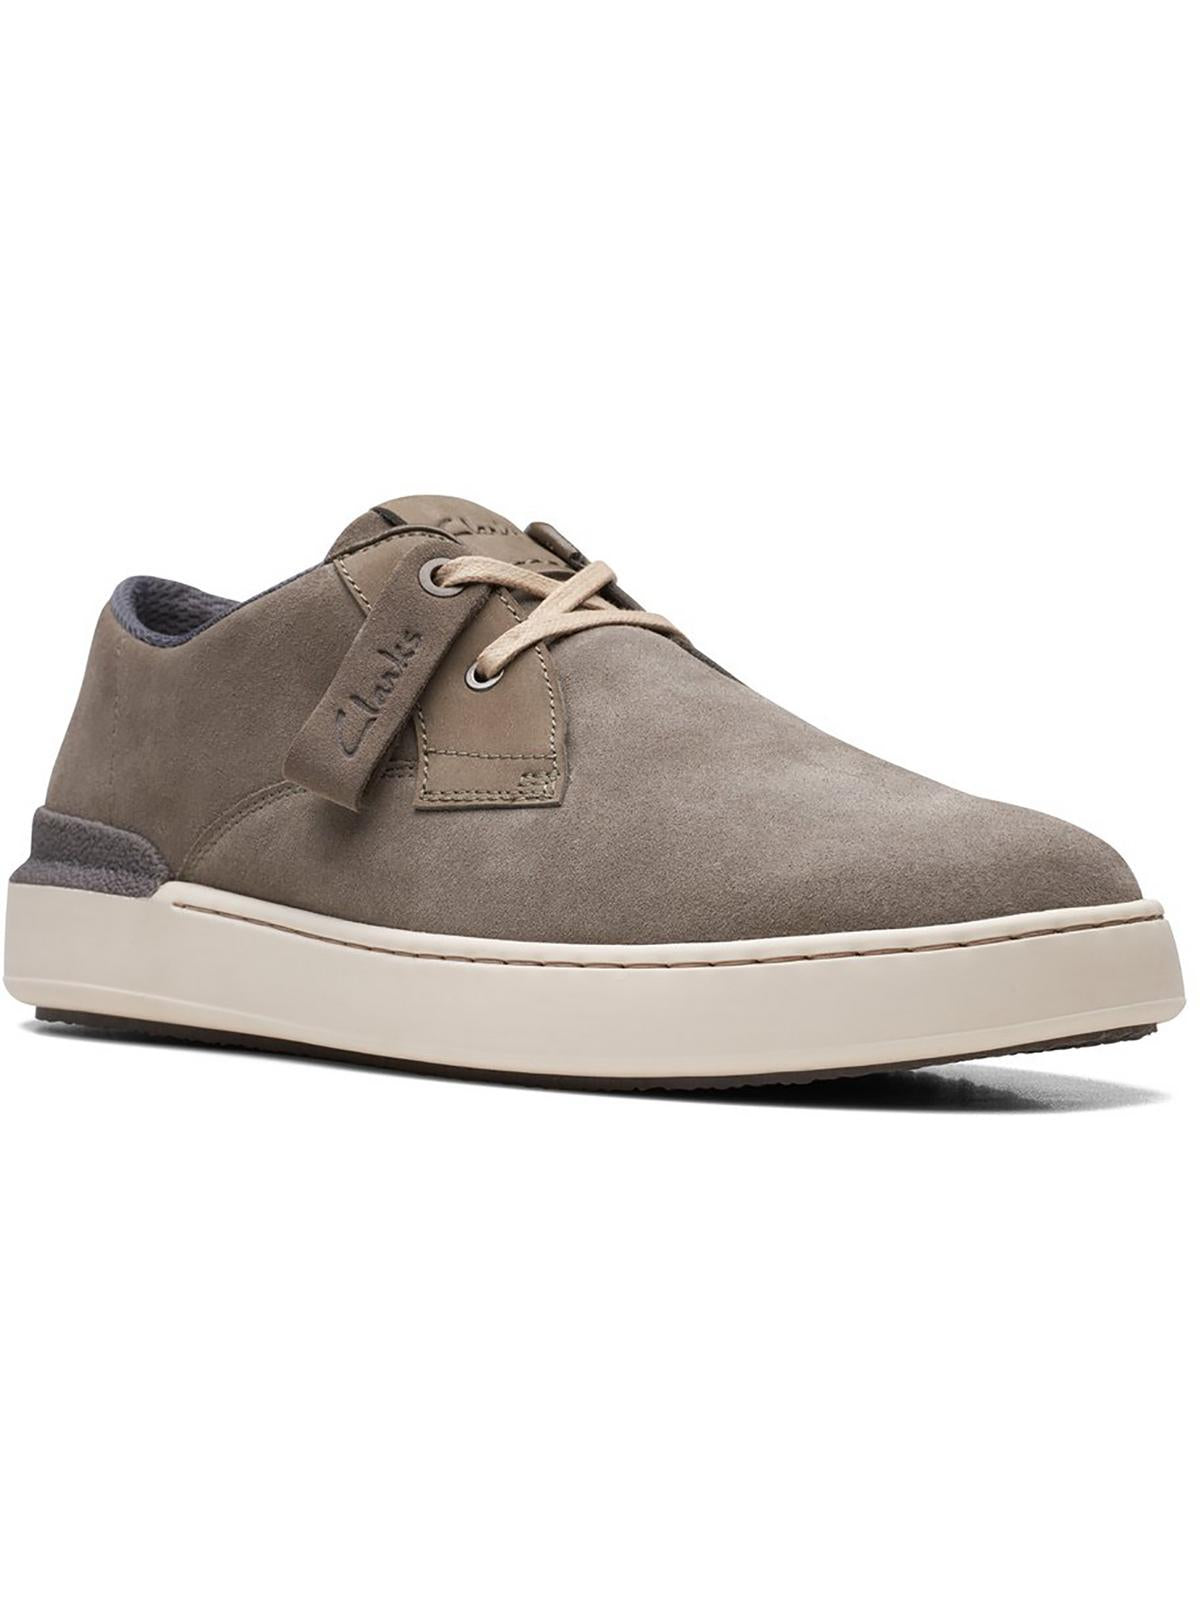 Shop Clarks Courtlite Khan Mens Leather Lifestyle Casual And Fashion Sneakers In Grey